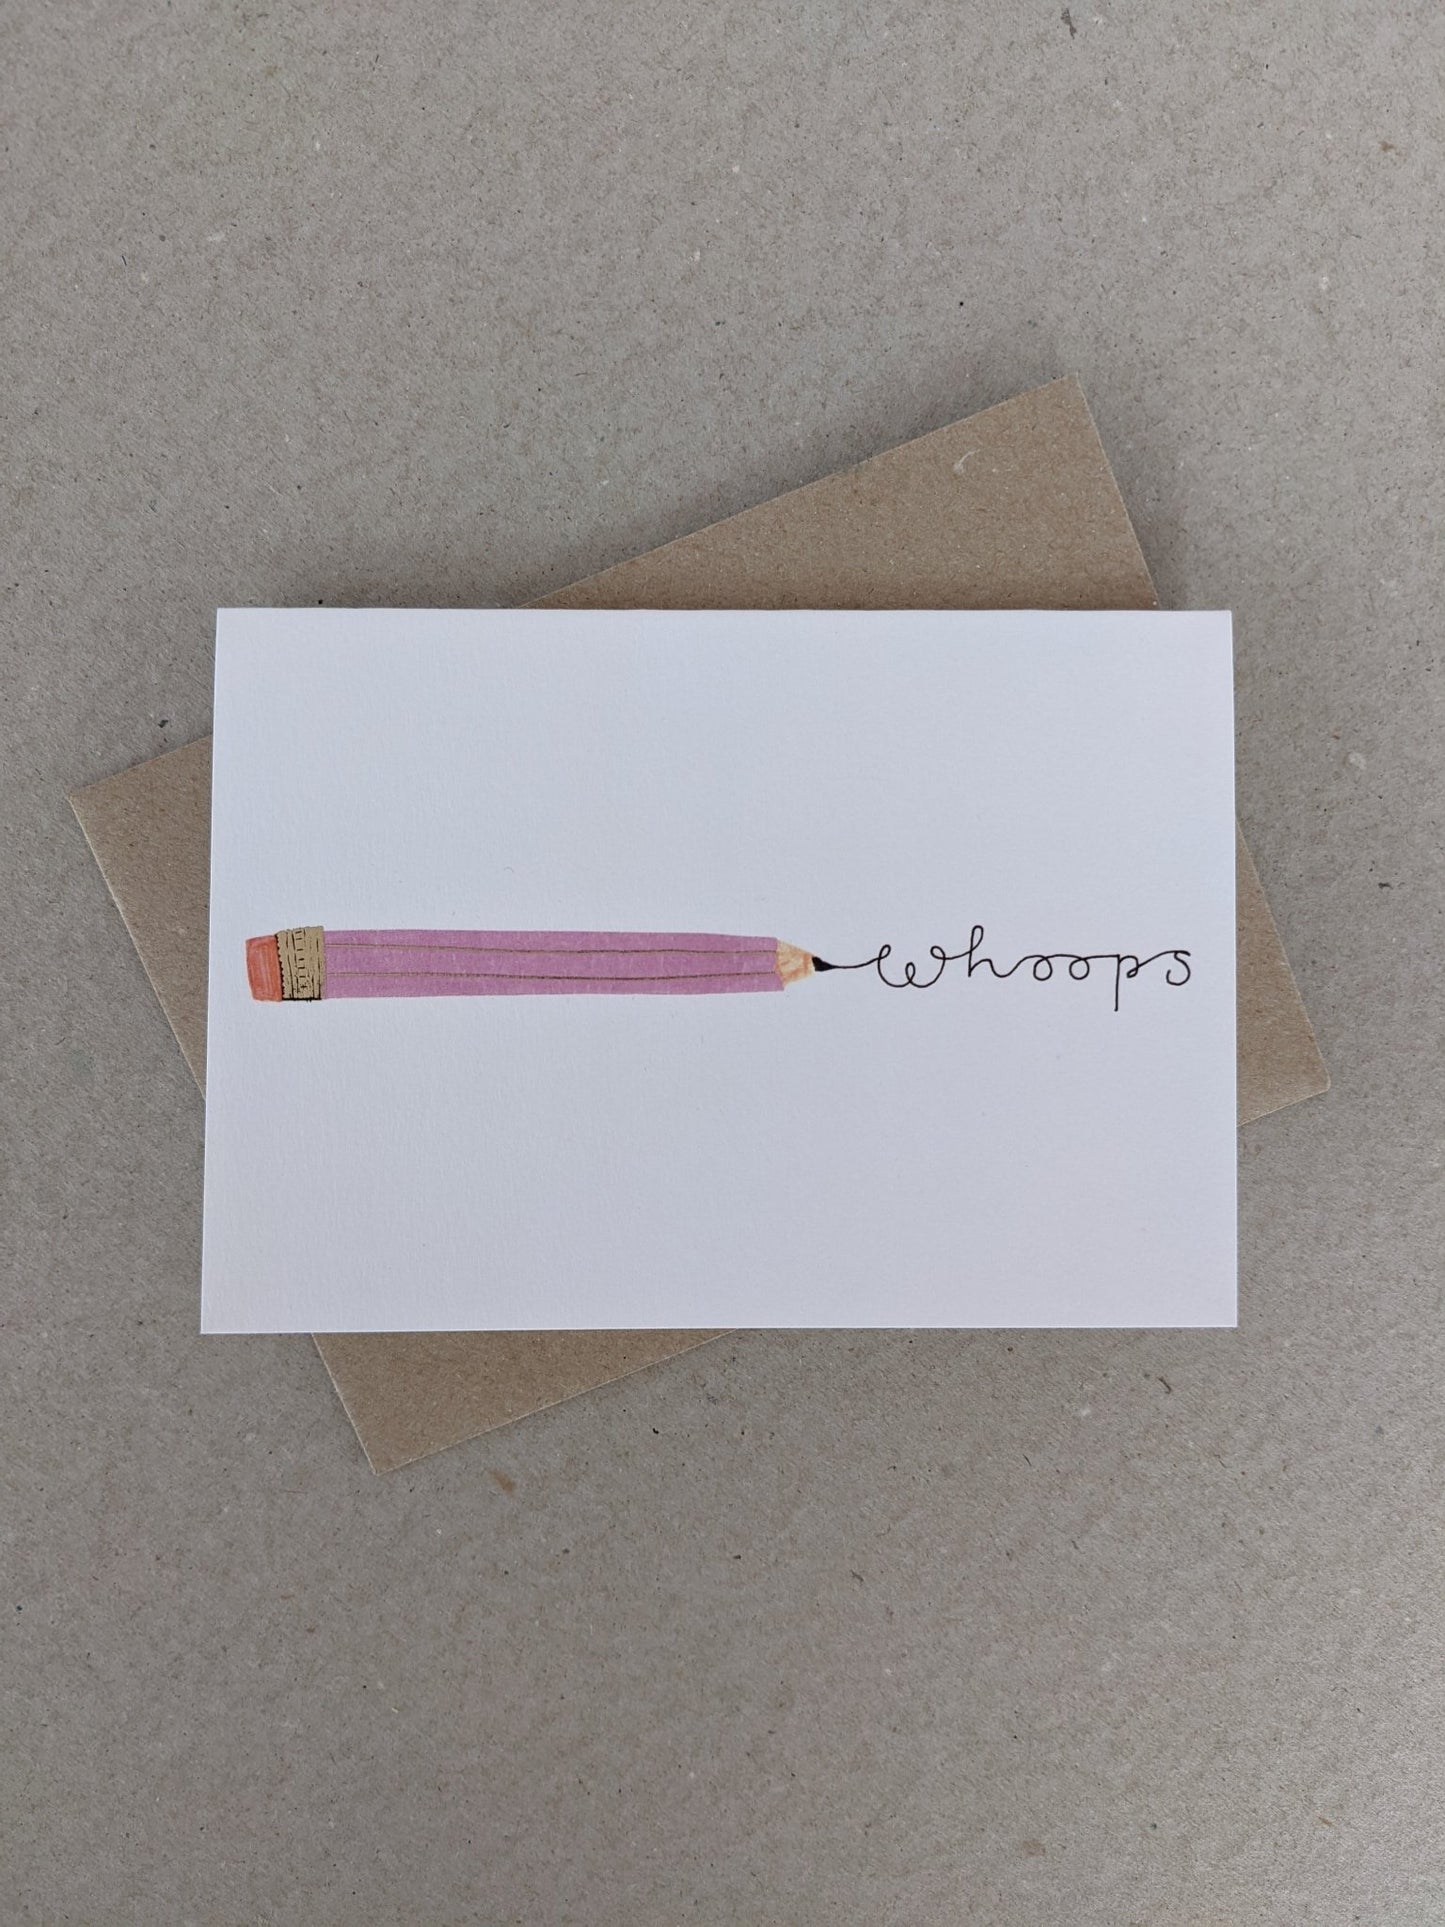 Whoops Greetings Card - The Stationery Cupboard